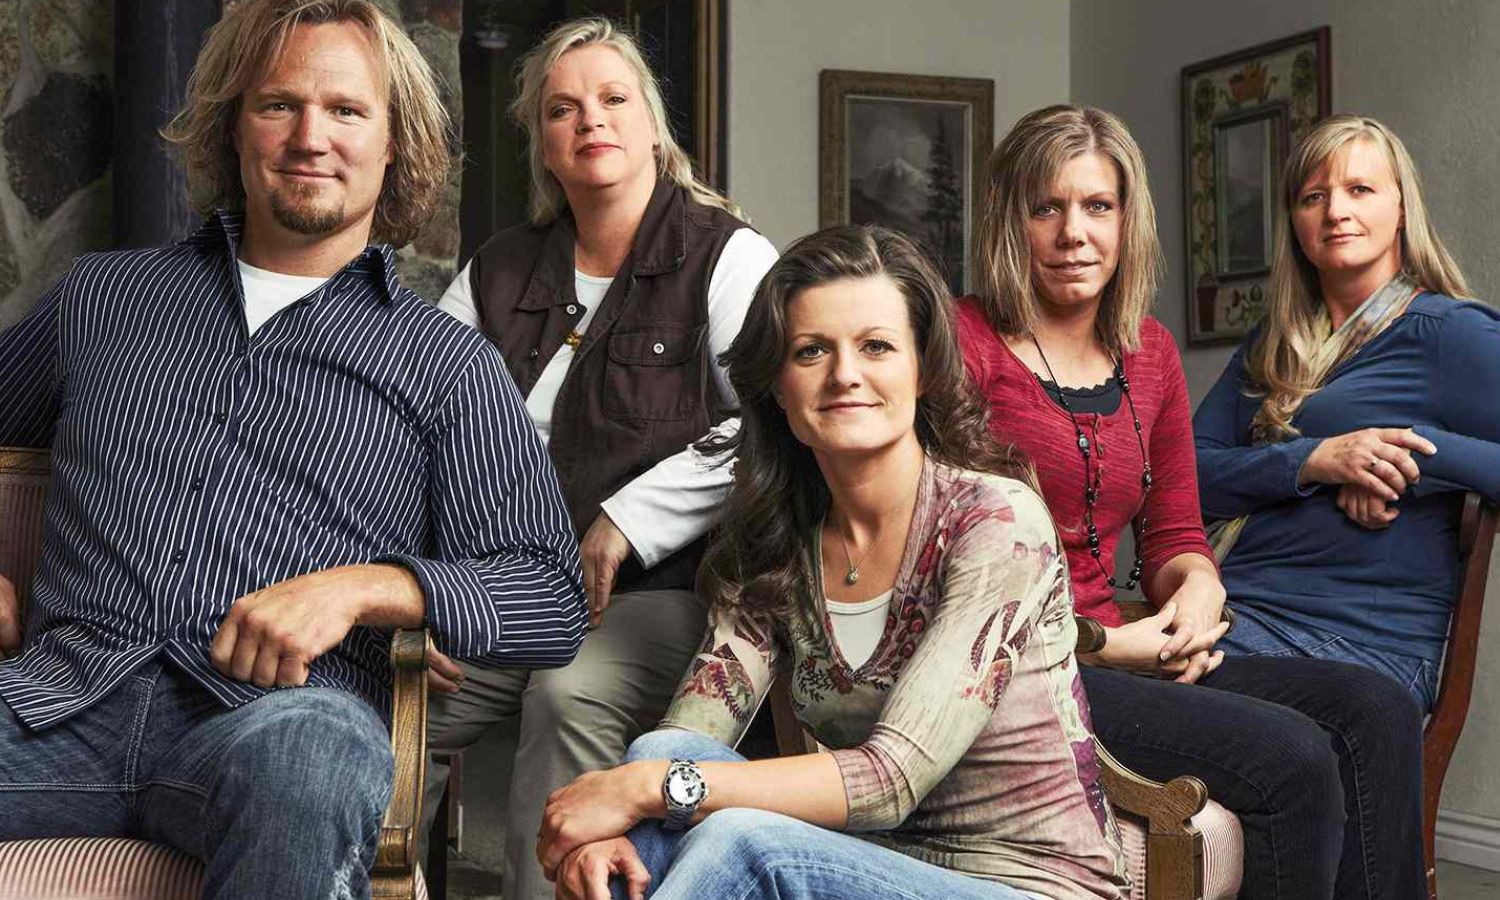 Sister Wives: Kody Brown's Tensions with Ex-Wife Christine Escalate on TLC's Show